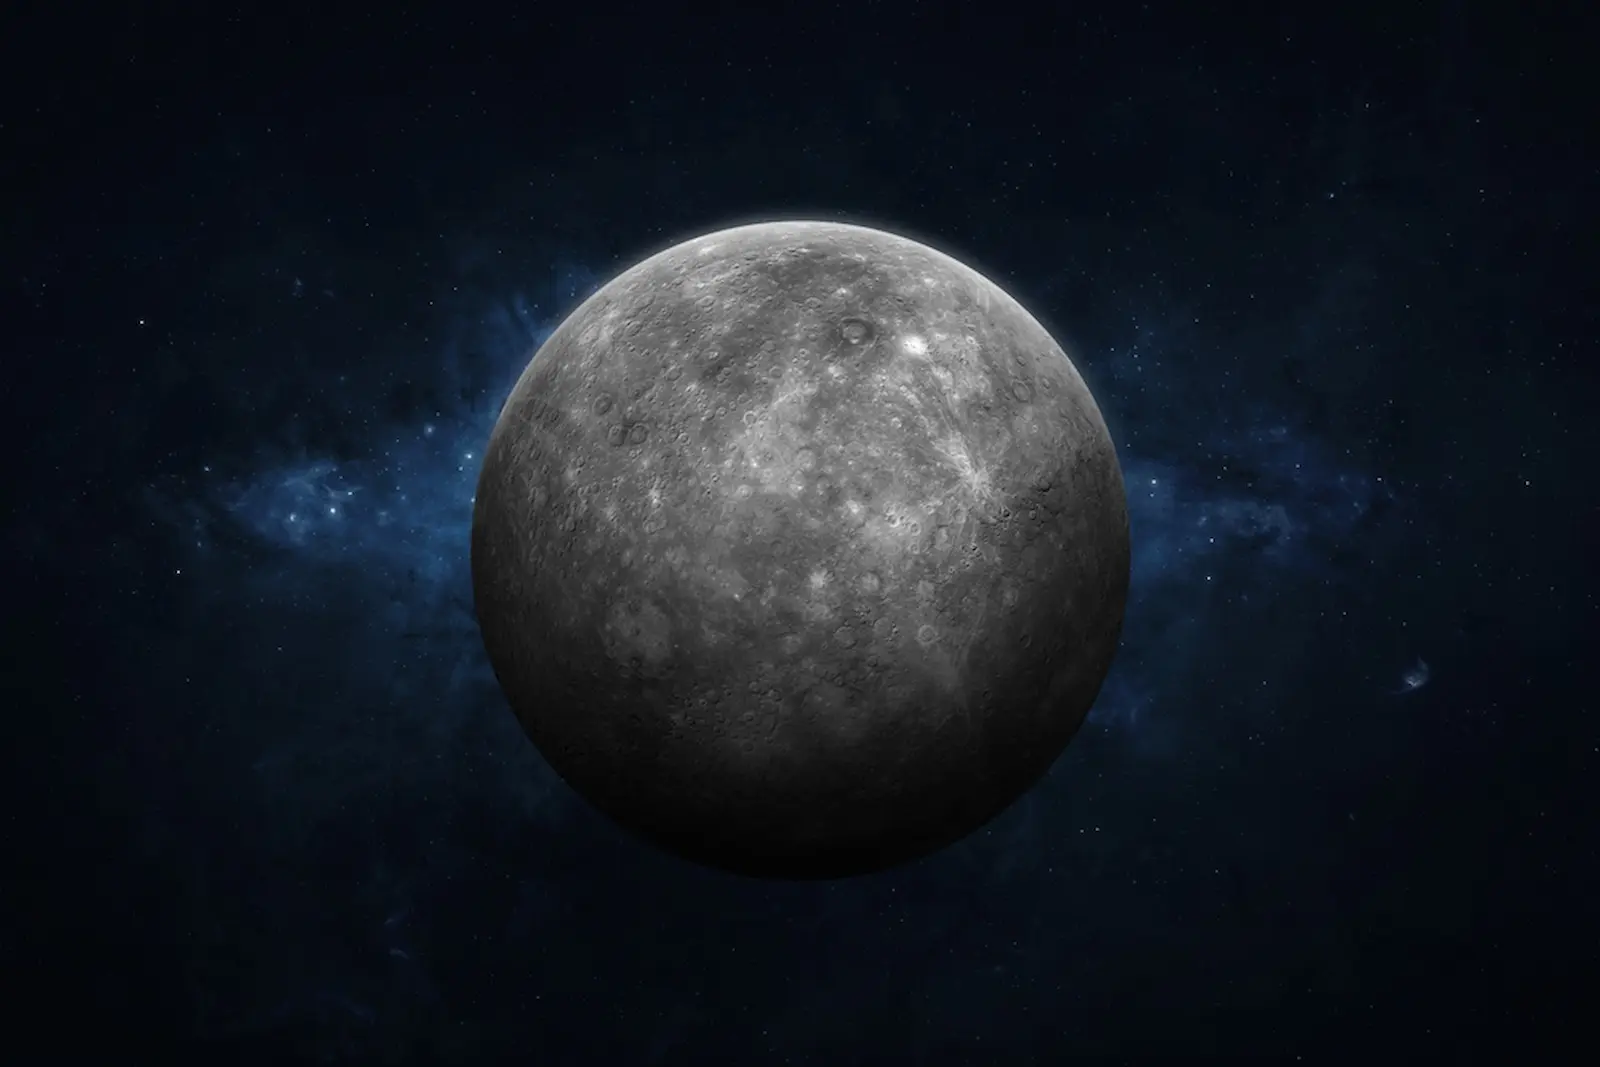 Meet Mercury The Smallest in The Solar System